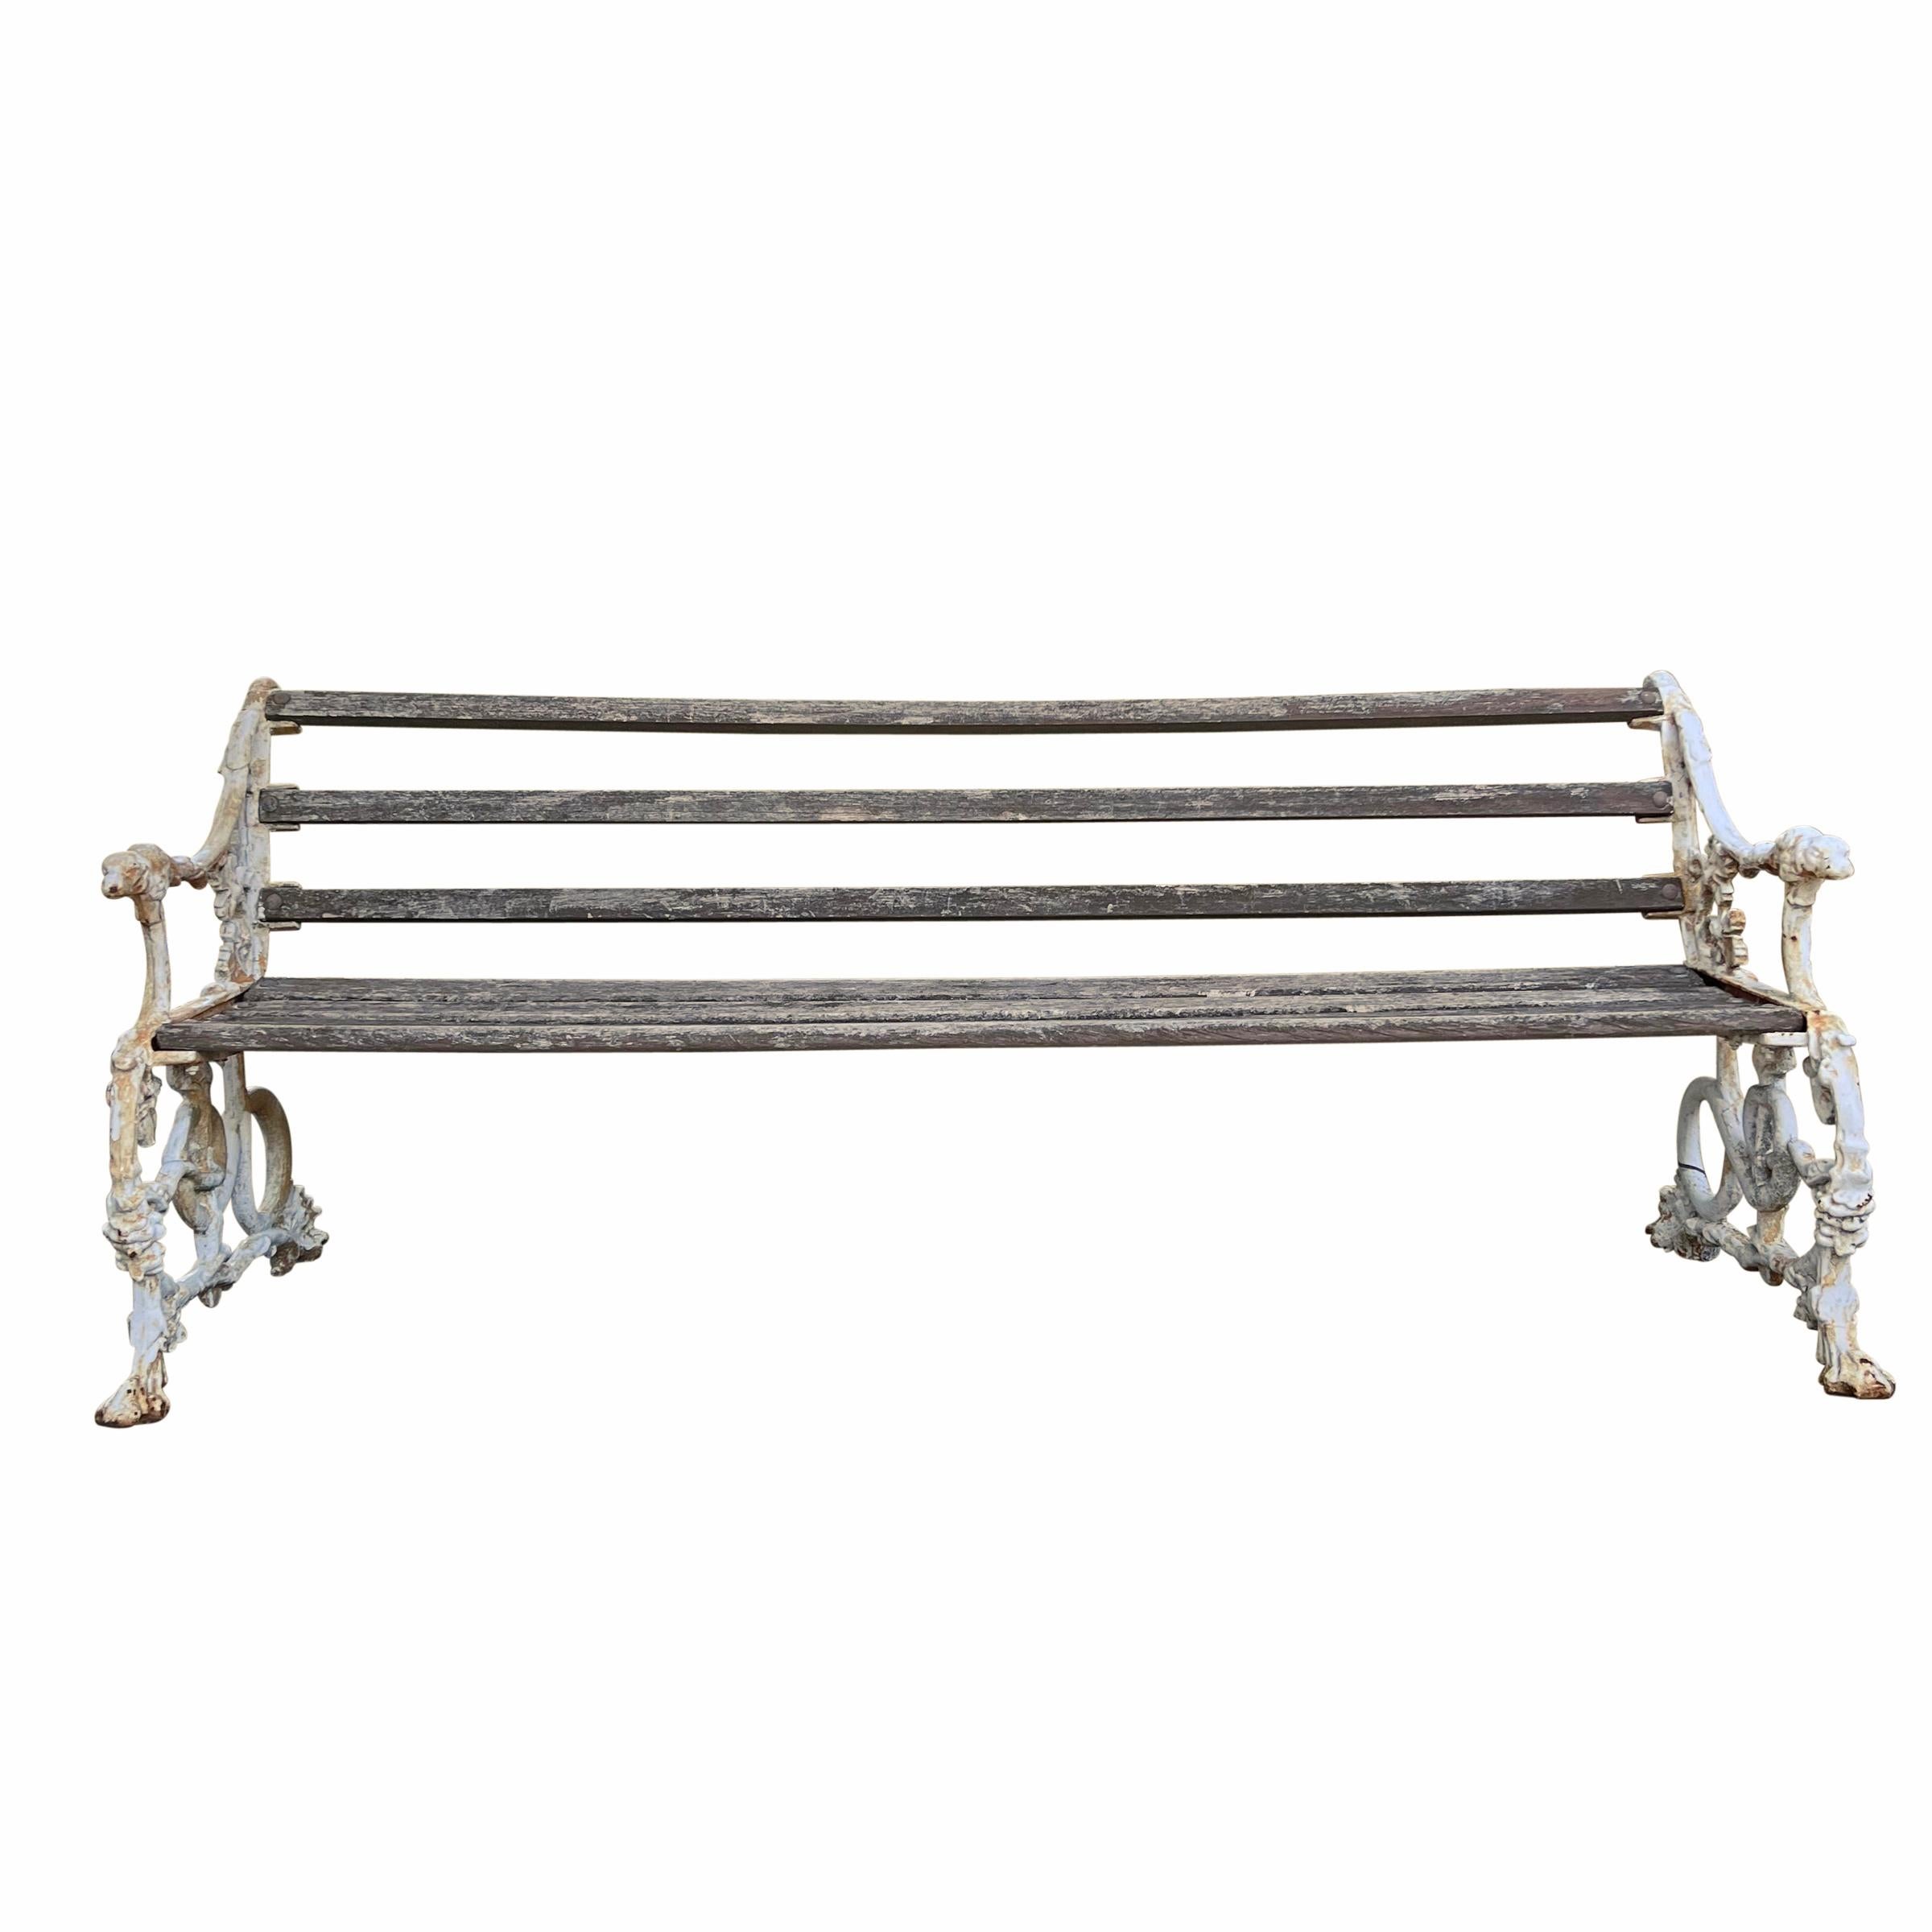 19th Century English 'Dog and Snake' Garden Bench In Good Condition For Sale In Chicago, IL